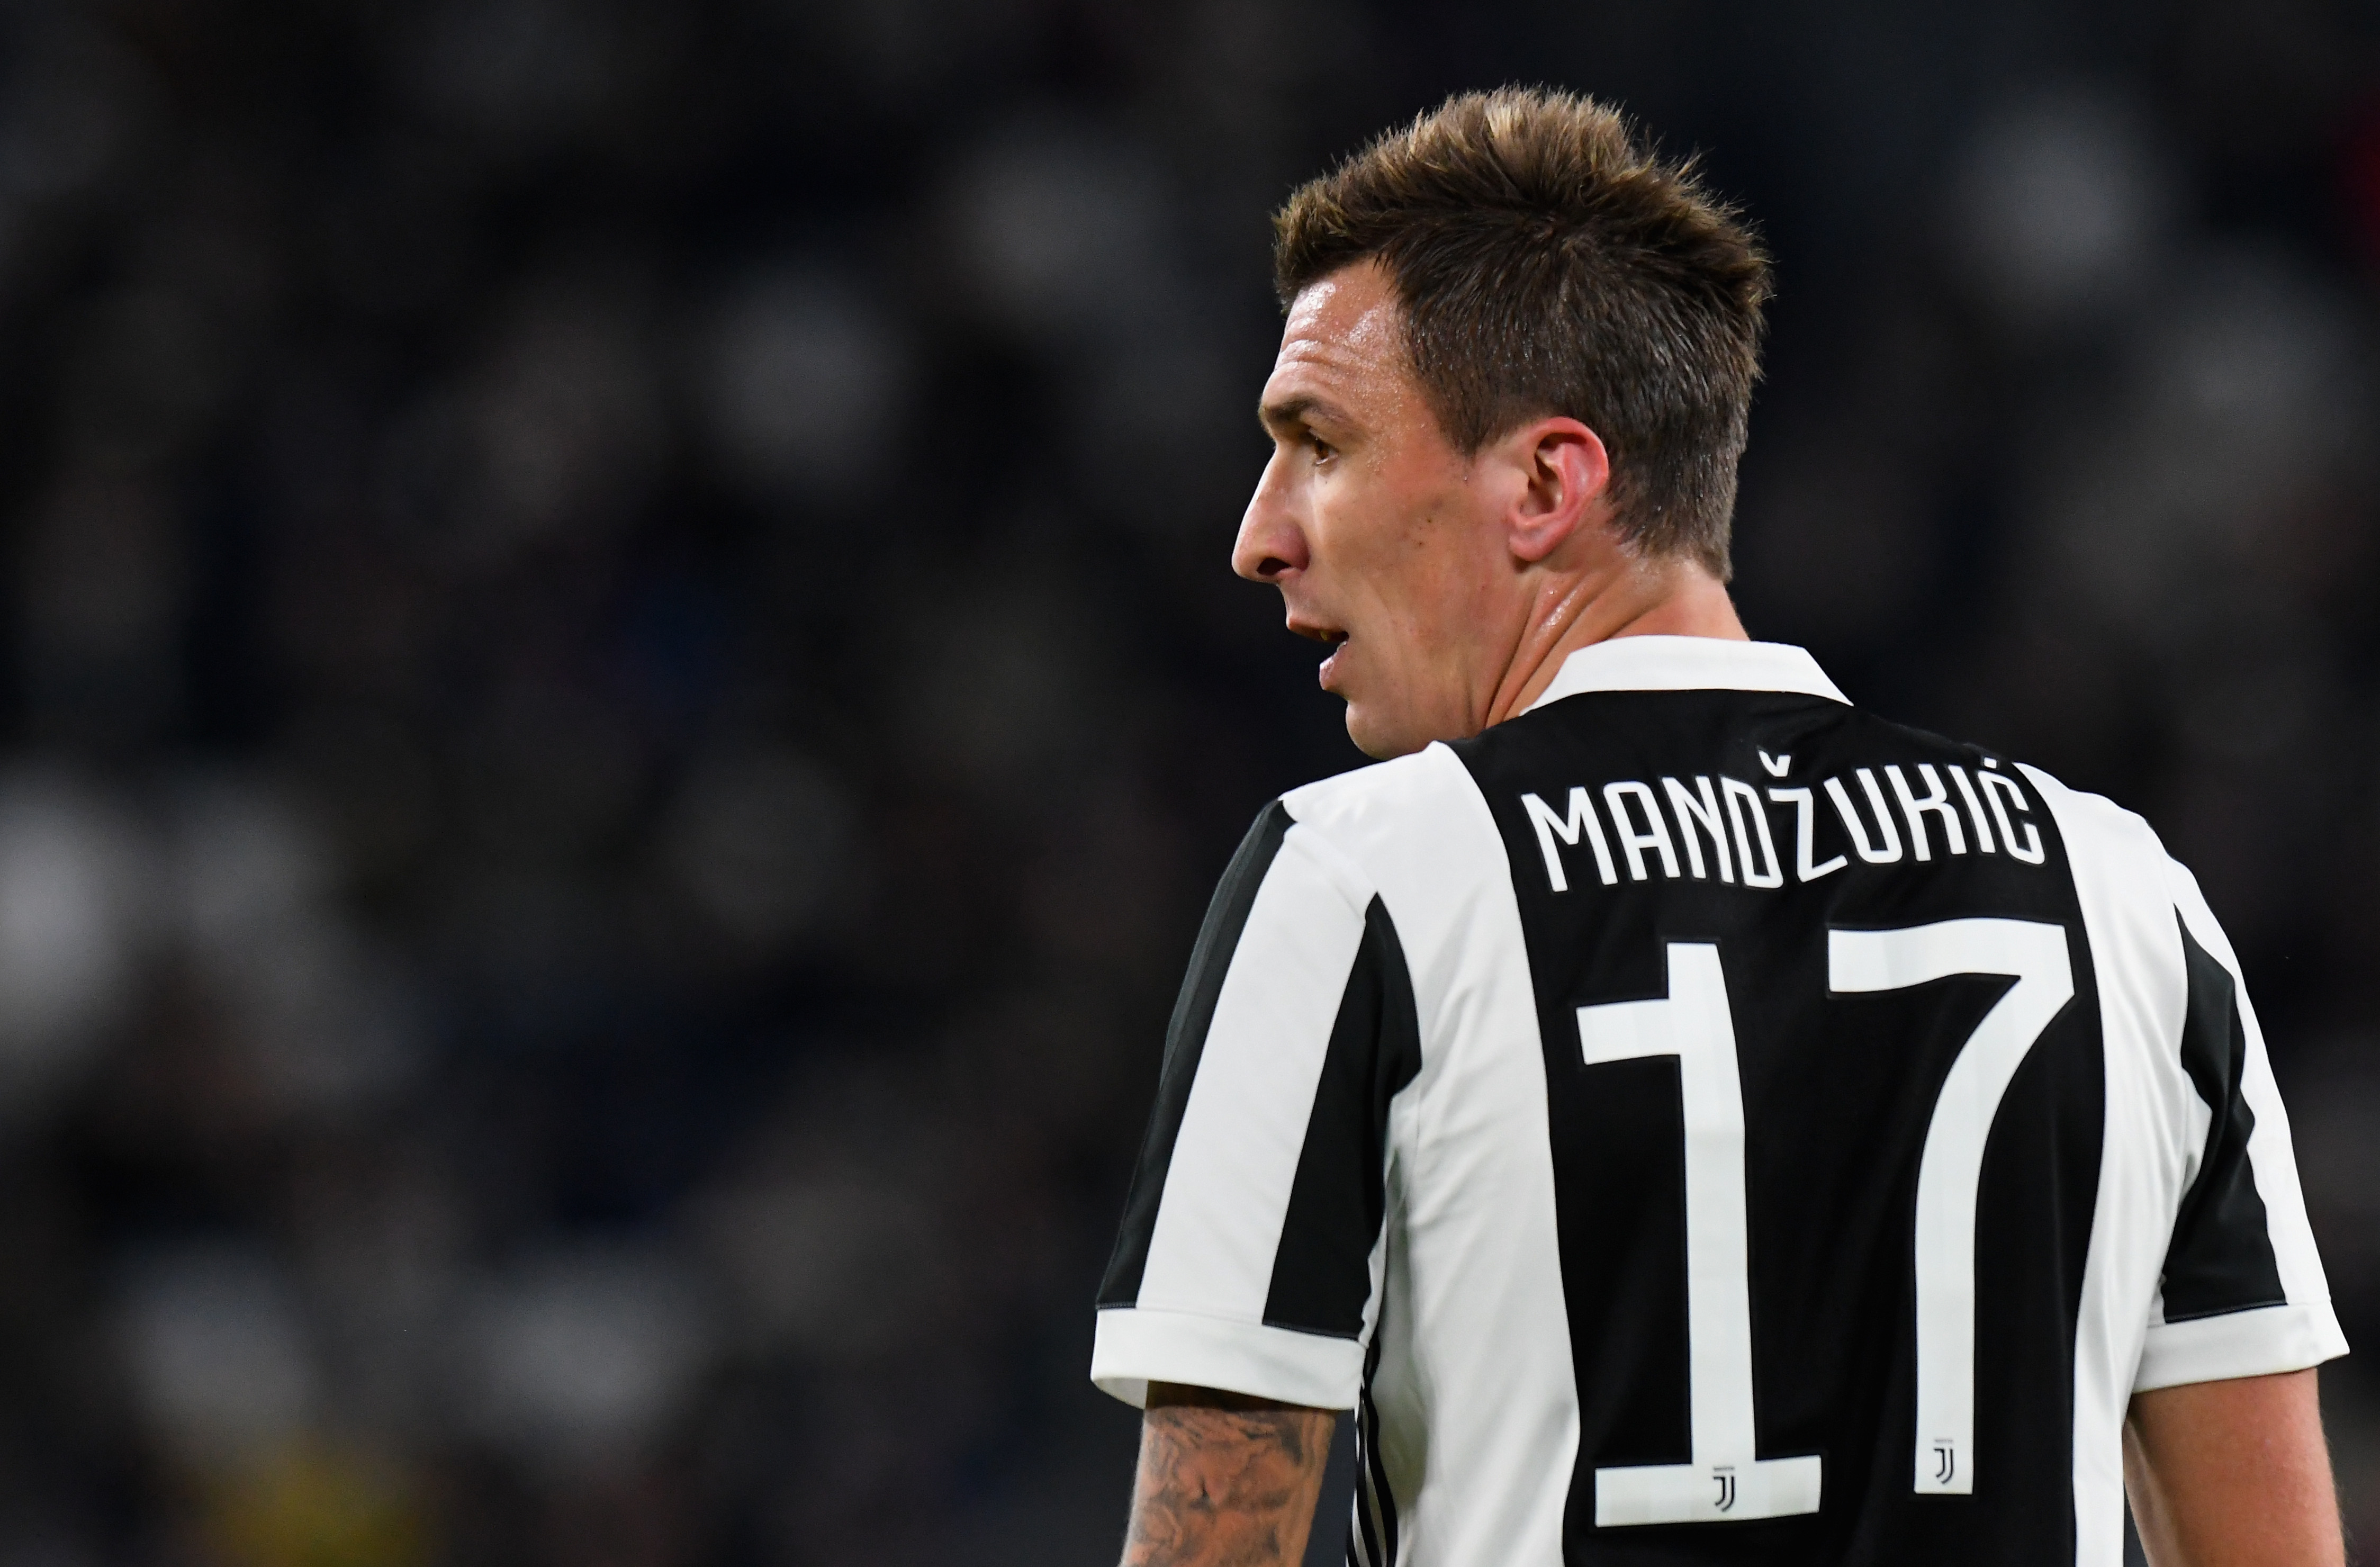 TURIN, ITALY - NOVEMBER 26: Mario Mandzukic of Juventus looks on during the Serie A match between Juventus and FC Crotone at Allianz Stadium on November 26, 2017 in Turin, Italy.  (Photo by Alessandro Sabattini/Getty Images)